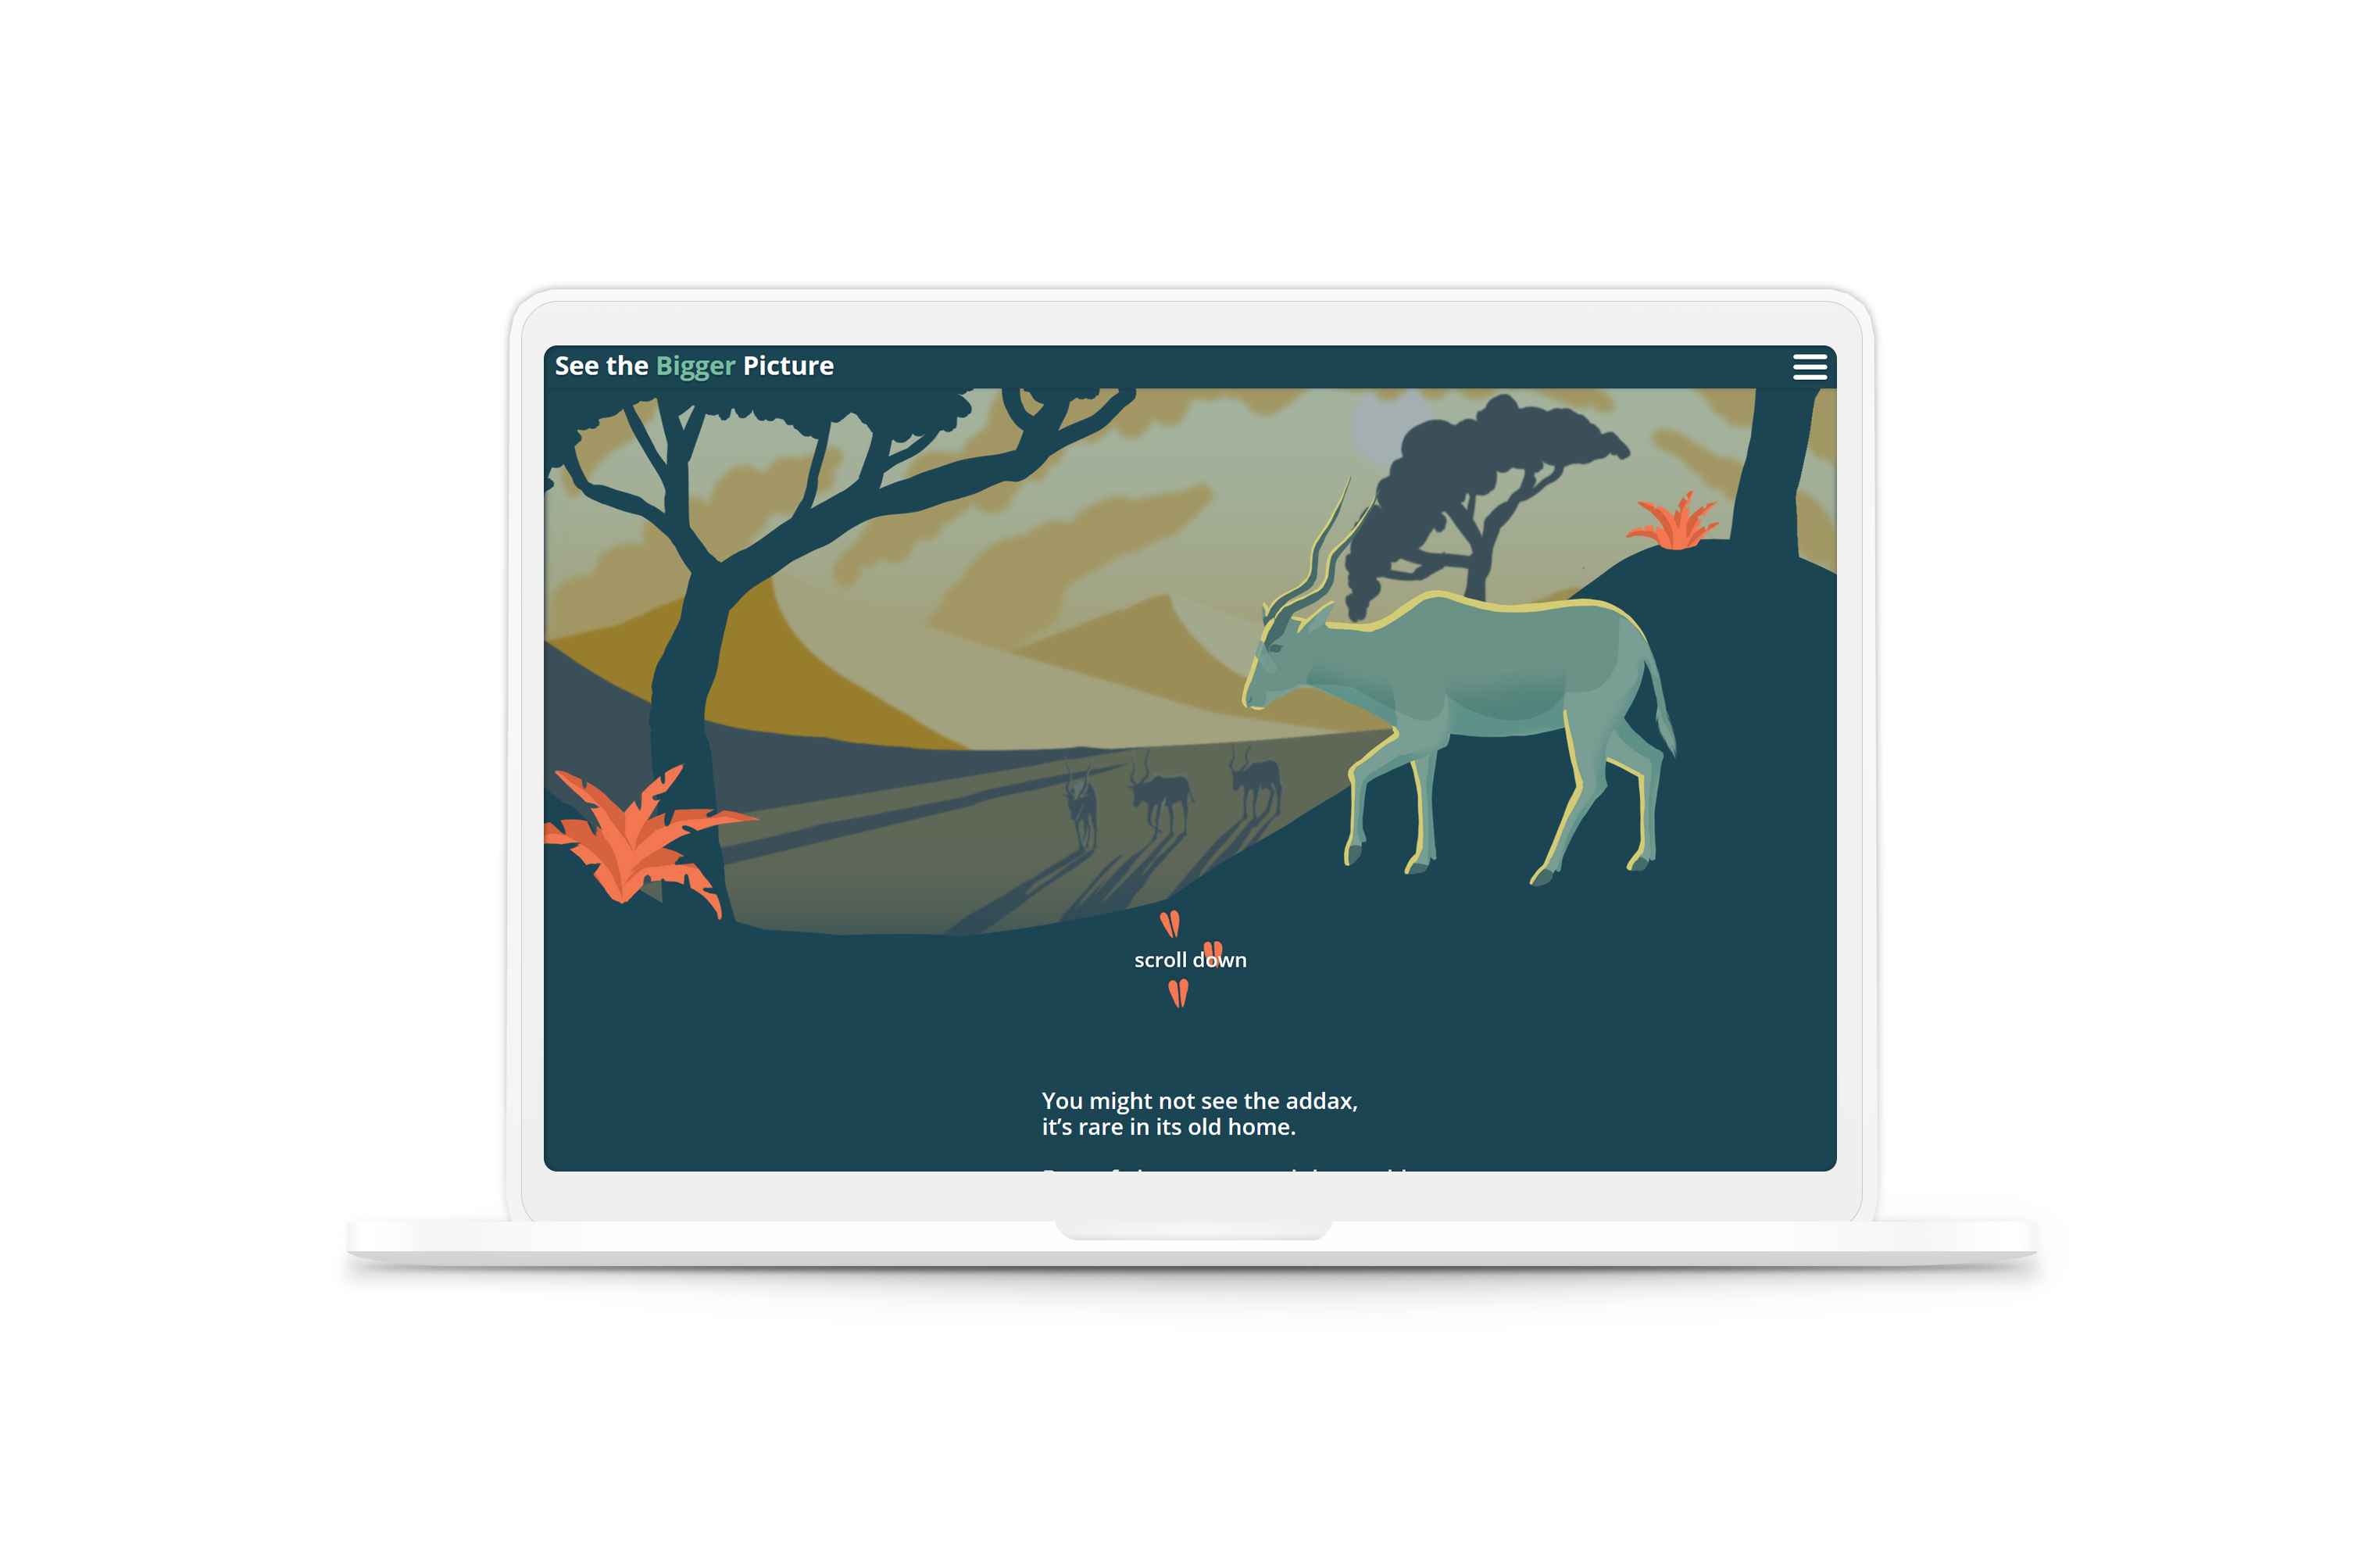 image of the support zoos website on laptop